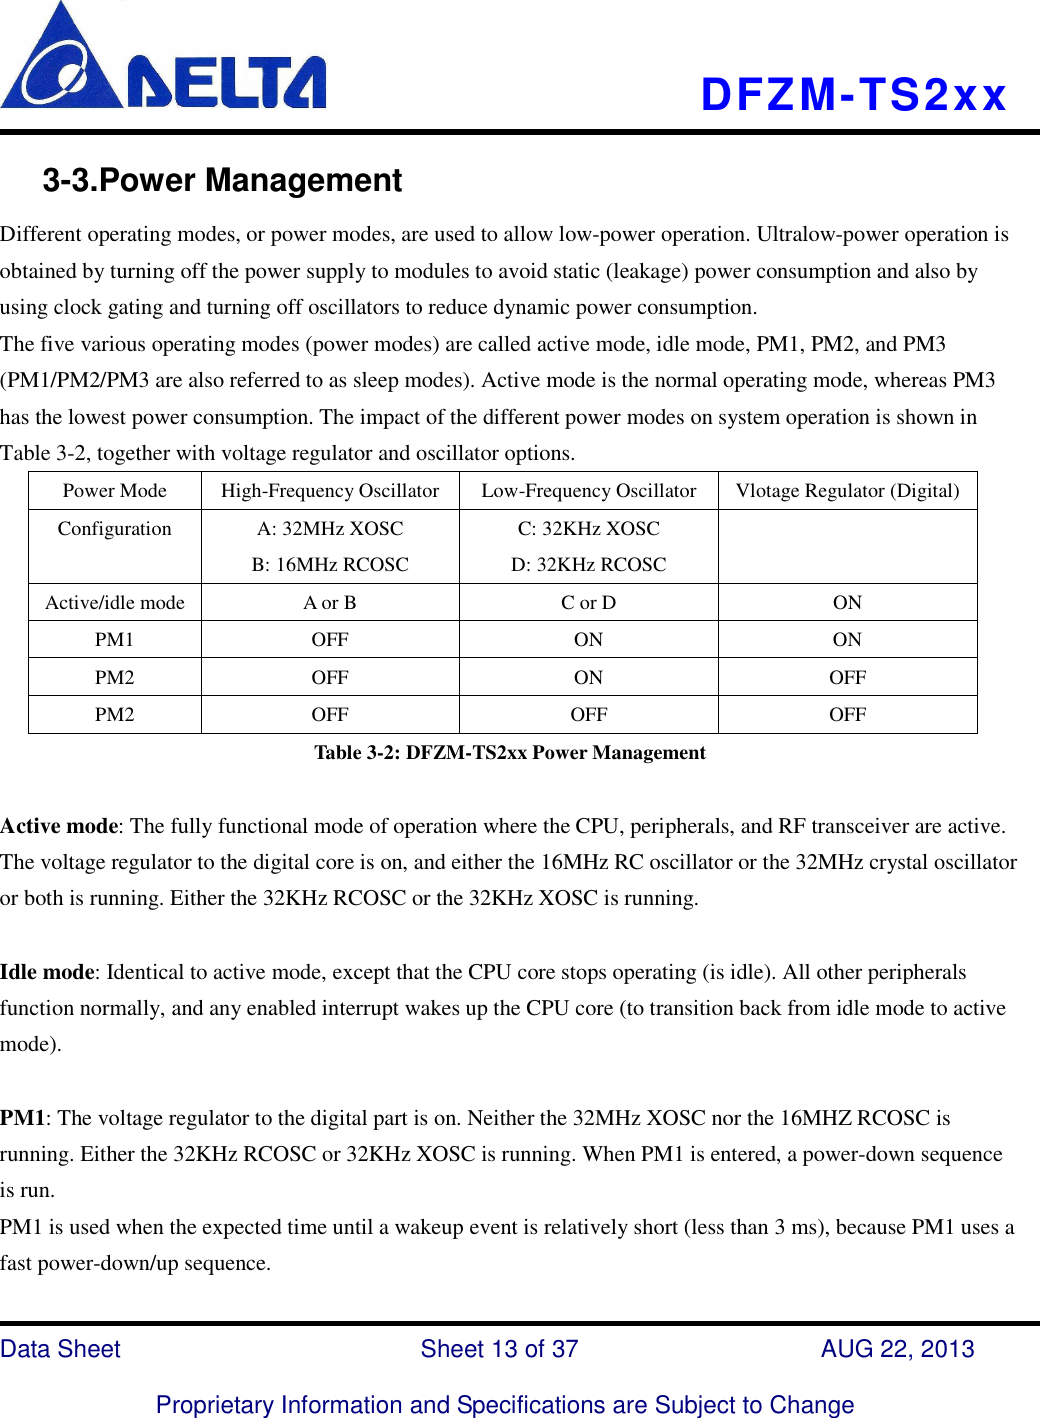    DFZM-TS2xx   Data Sheet                              Sheet 13 of 37                    AUG 22, 2013  Proprietary Information and Specifications are Subject to Change      3-3.Power Management Different operating modes, or power modes, are used to allow low-power operation. Ultralow-power operation is obtained by turning off the power supply to modules to avoid static (leakage) power consumption and also by using clock gating and turning off oscillators to reduce dynamic power consumption.   The five various operating modes (power modes) are called active mode, idle mode, PM1, PM2, and PM3 (PM1/PM2/PM3 are also referred to as sleep modes). Active mode is the normal operating mode, whereas PM3 has the lowest power consumption. The impact of the different power modes on system operation is shown in Table 3-2, together with voltage regulator and oscillator options.   Power Mode  High-Frequency Oscillator  Low-Frequency Oscillator  Vlotage Regulator (Digital) Configuration  A: 32MHz XOSC B: 16MHz RCOSC C: 32KHz XOSC D: 32KHz RCOSC  Active/idle mode A or B  C or D  ON PM1  OFF  ON  ON PM2  OFF  ON  OFF PM2  OFF  OFF  OFF Table 3-2: DFZM-TS2xx Power Management  Active mode: The fully functional mode of operation where the CPU, peripherals, and RF transceiver are active. The voltage regulator to the digital core is on, and either the 16MHz RC oscillator or the 32MHz crystal oscillator or both is running. Either the 32KHz RCOSC or the 32KHz XOSC is running.    Idle mode: Identical to active mode, except that the CPU core stops operating (is idle). All other peripherals function normally, and any enabled interrupt wakes up the CPU core (to transition back from idle mode to active mode).  PM1: The voltage regulator to the digital part is on. Neither the 32MHz XOSC nor the 16MHZ RCOSC is running. Either the 32KHz RCOSC or 32KHz XOSC is running. When PM1 is entered, a power-down sequence is run.   PM1 is used when the expected time until a wakeup event is relatively short (less than 3 ms), because PM1 uses a fast power-down/up sequence. 